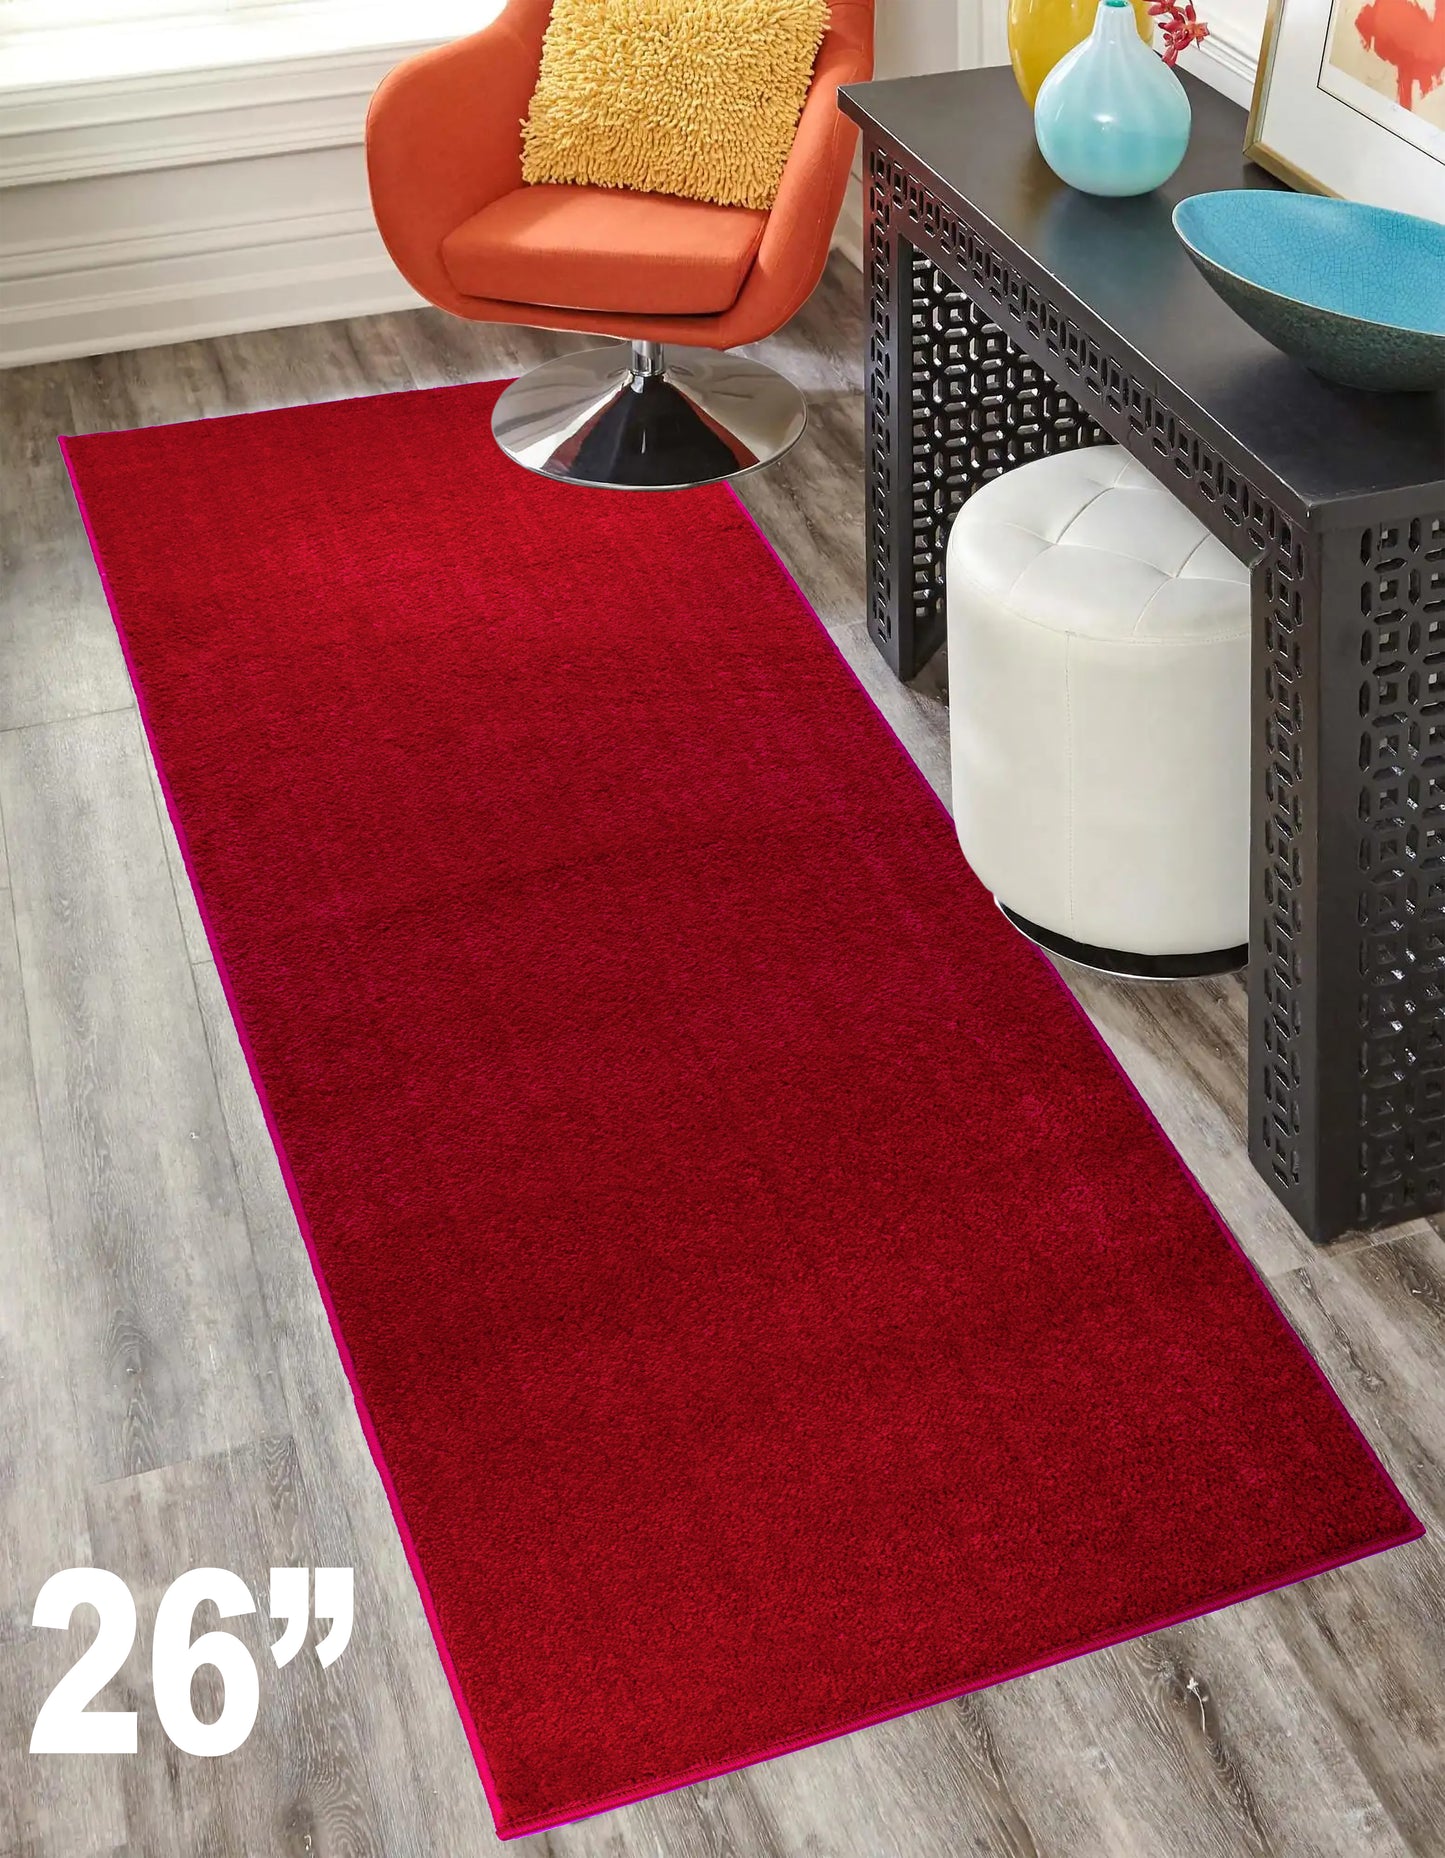 Machine Washable Custom Size Runner Rug Solid Red Color Skid Resistant Rug Runner Customize Up to 50 Feet and 26 Inch Width Runner Rug